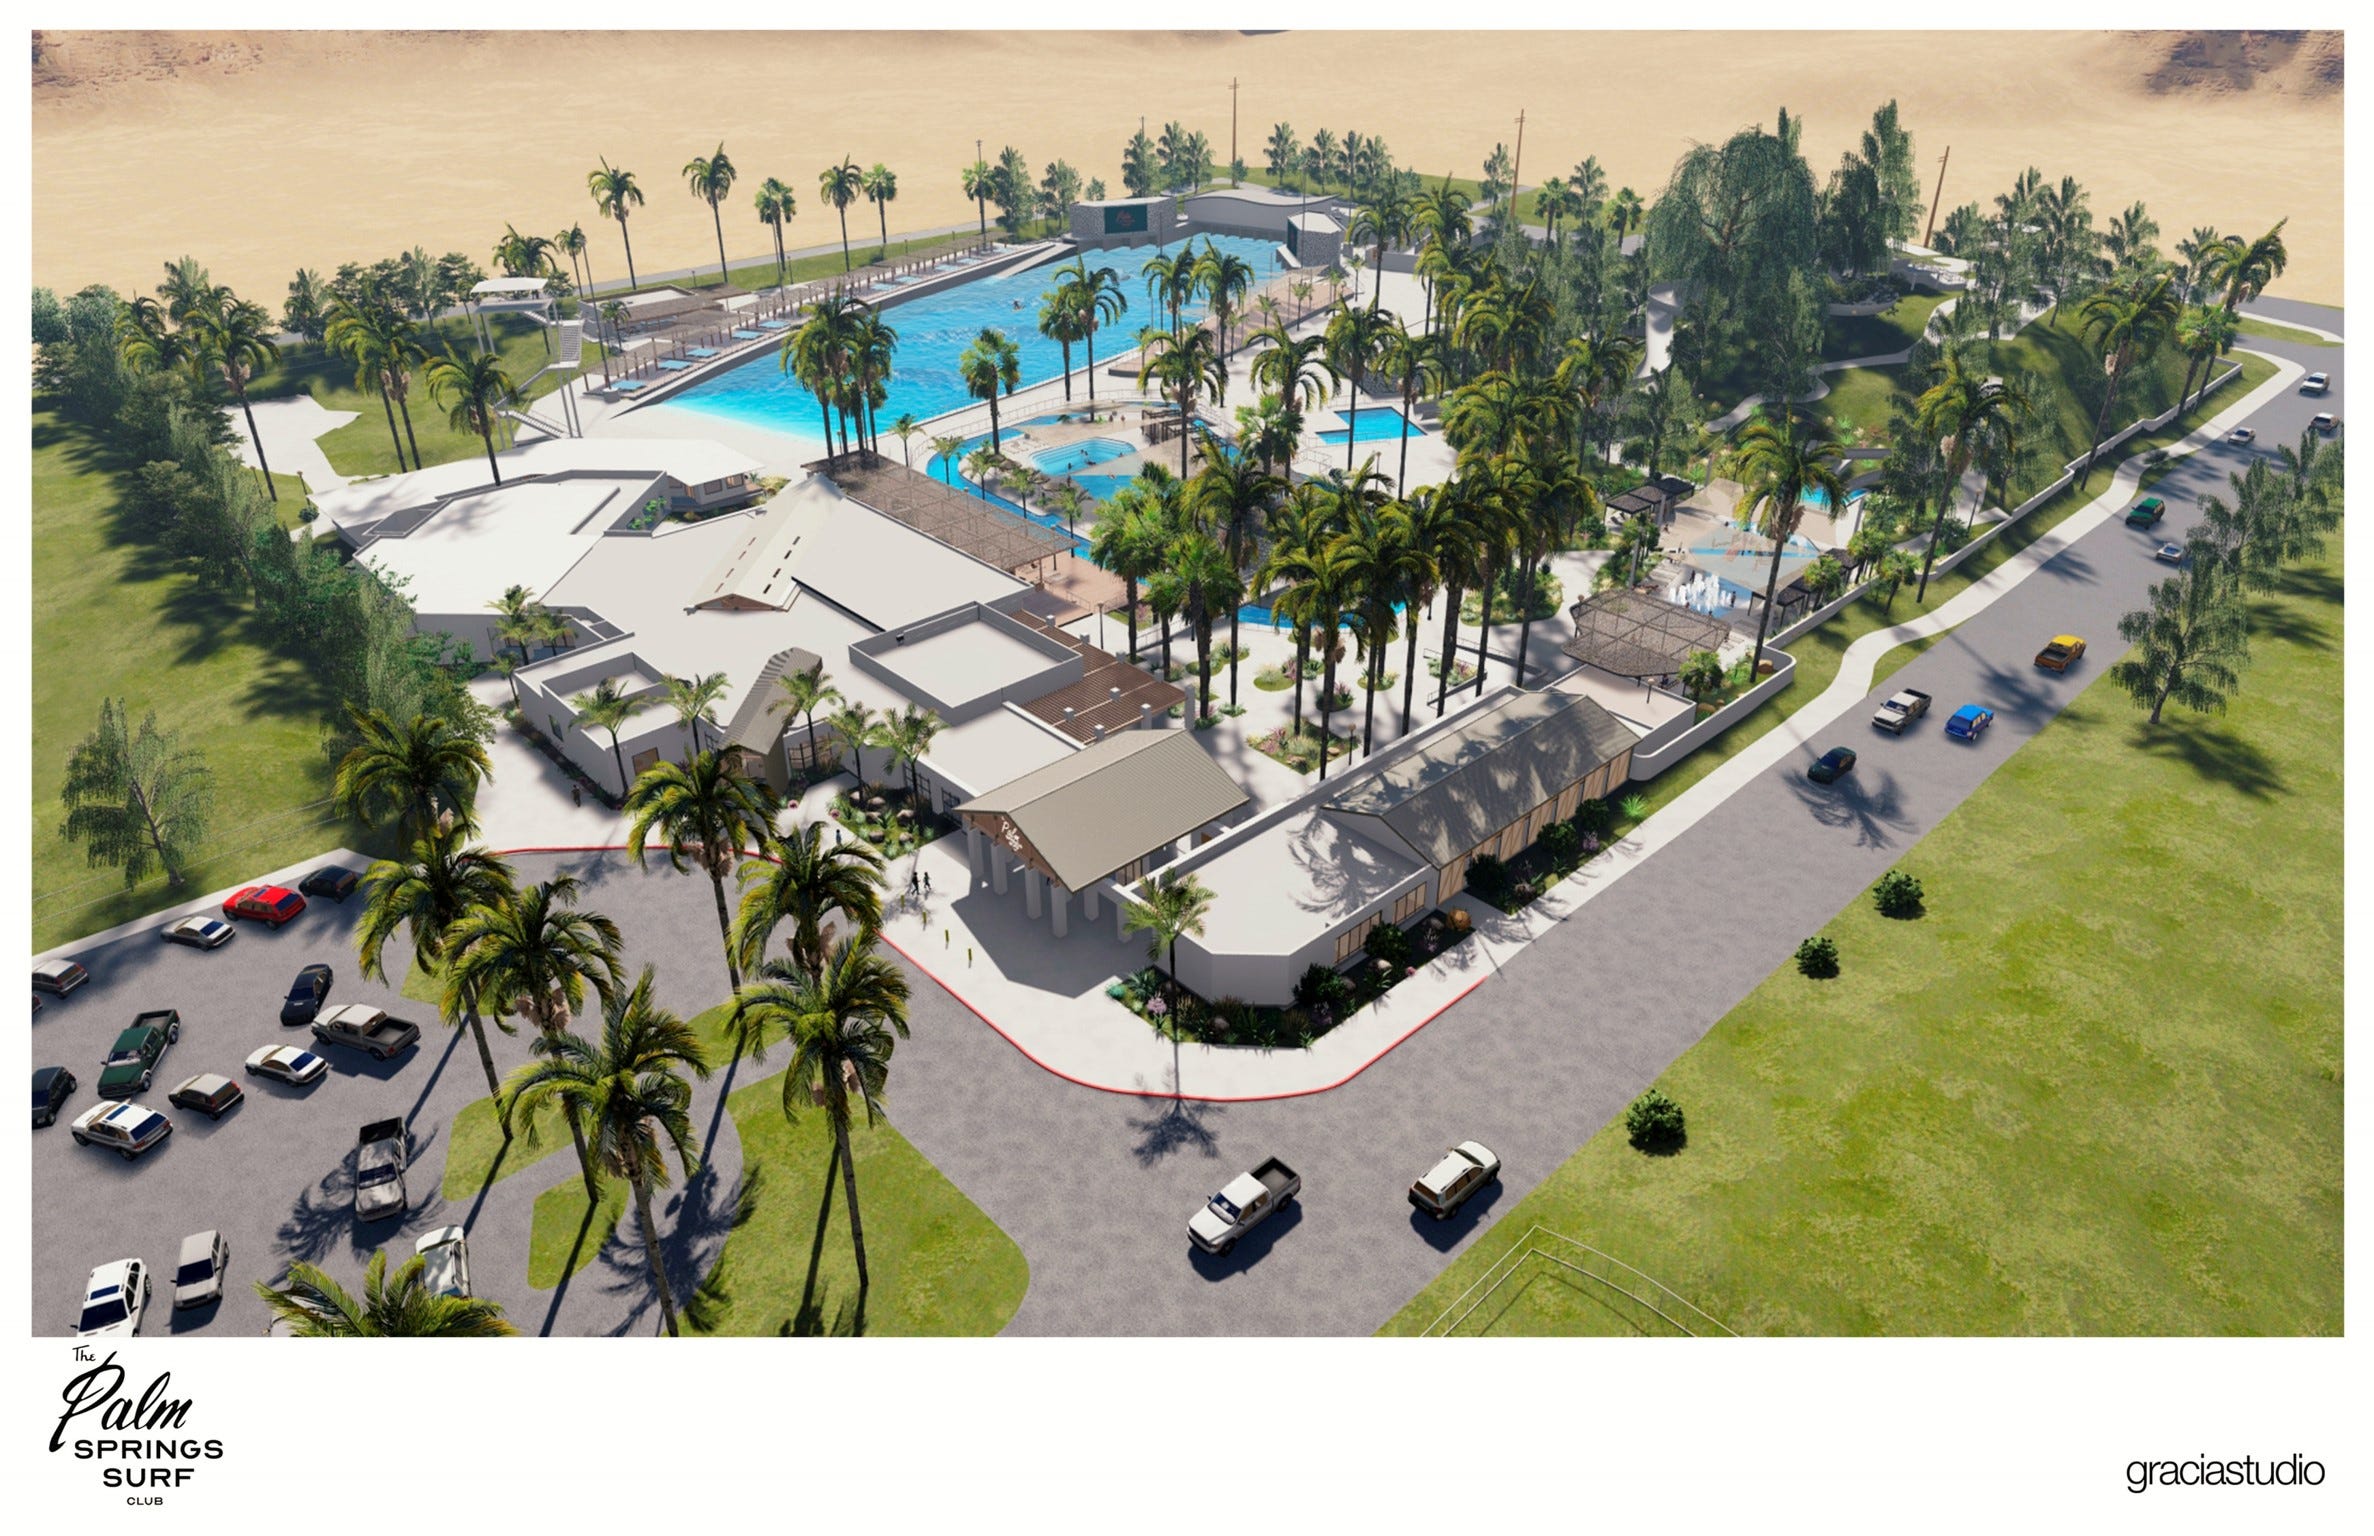 Palm Springs Surf Club gets planning approval